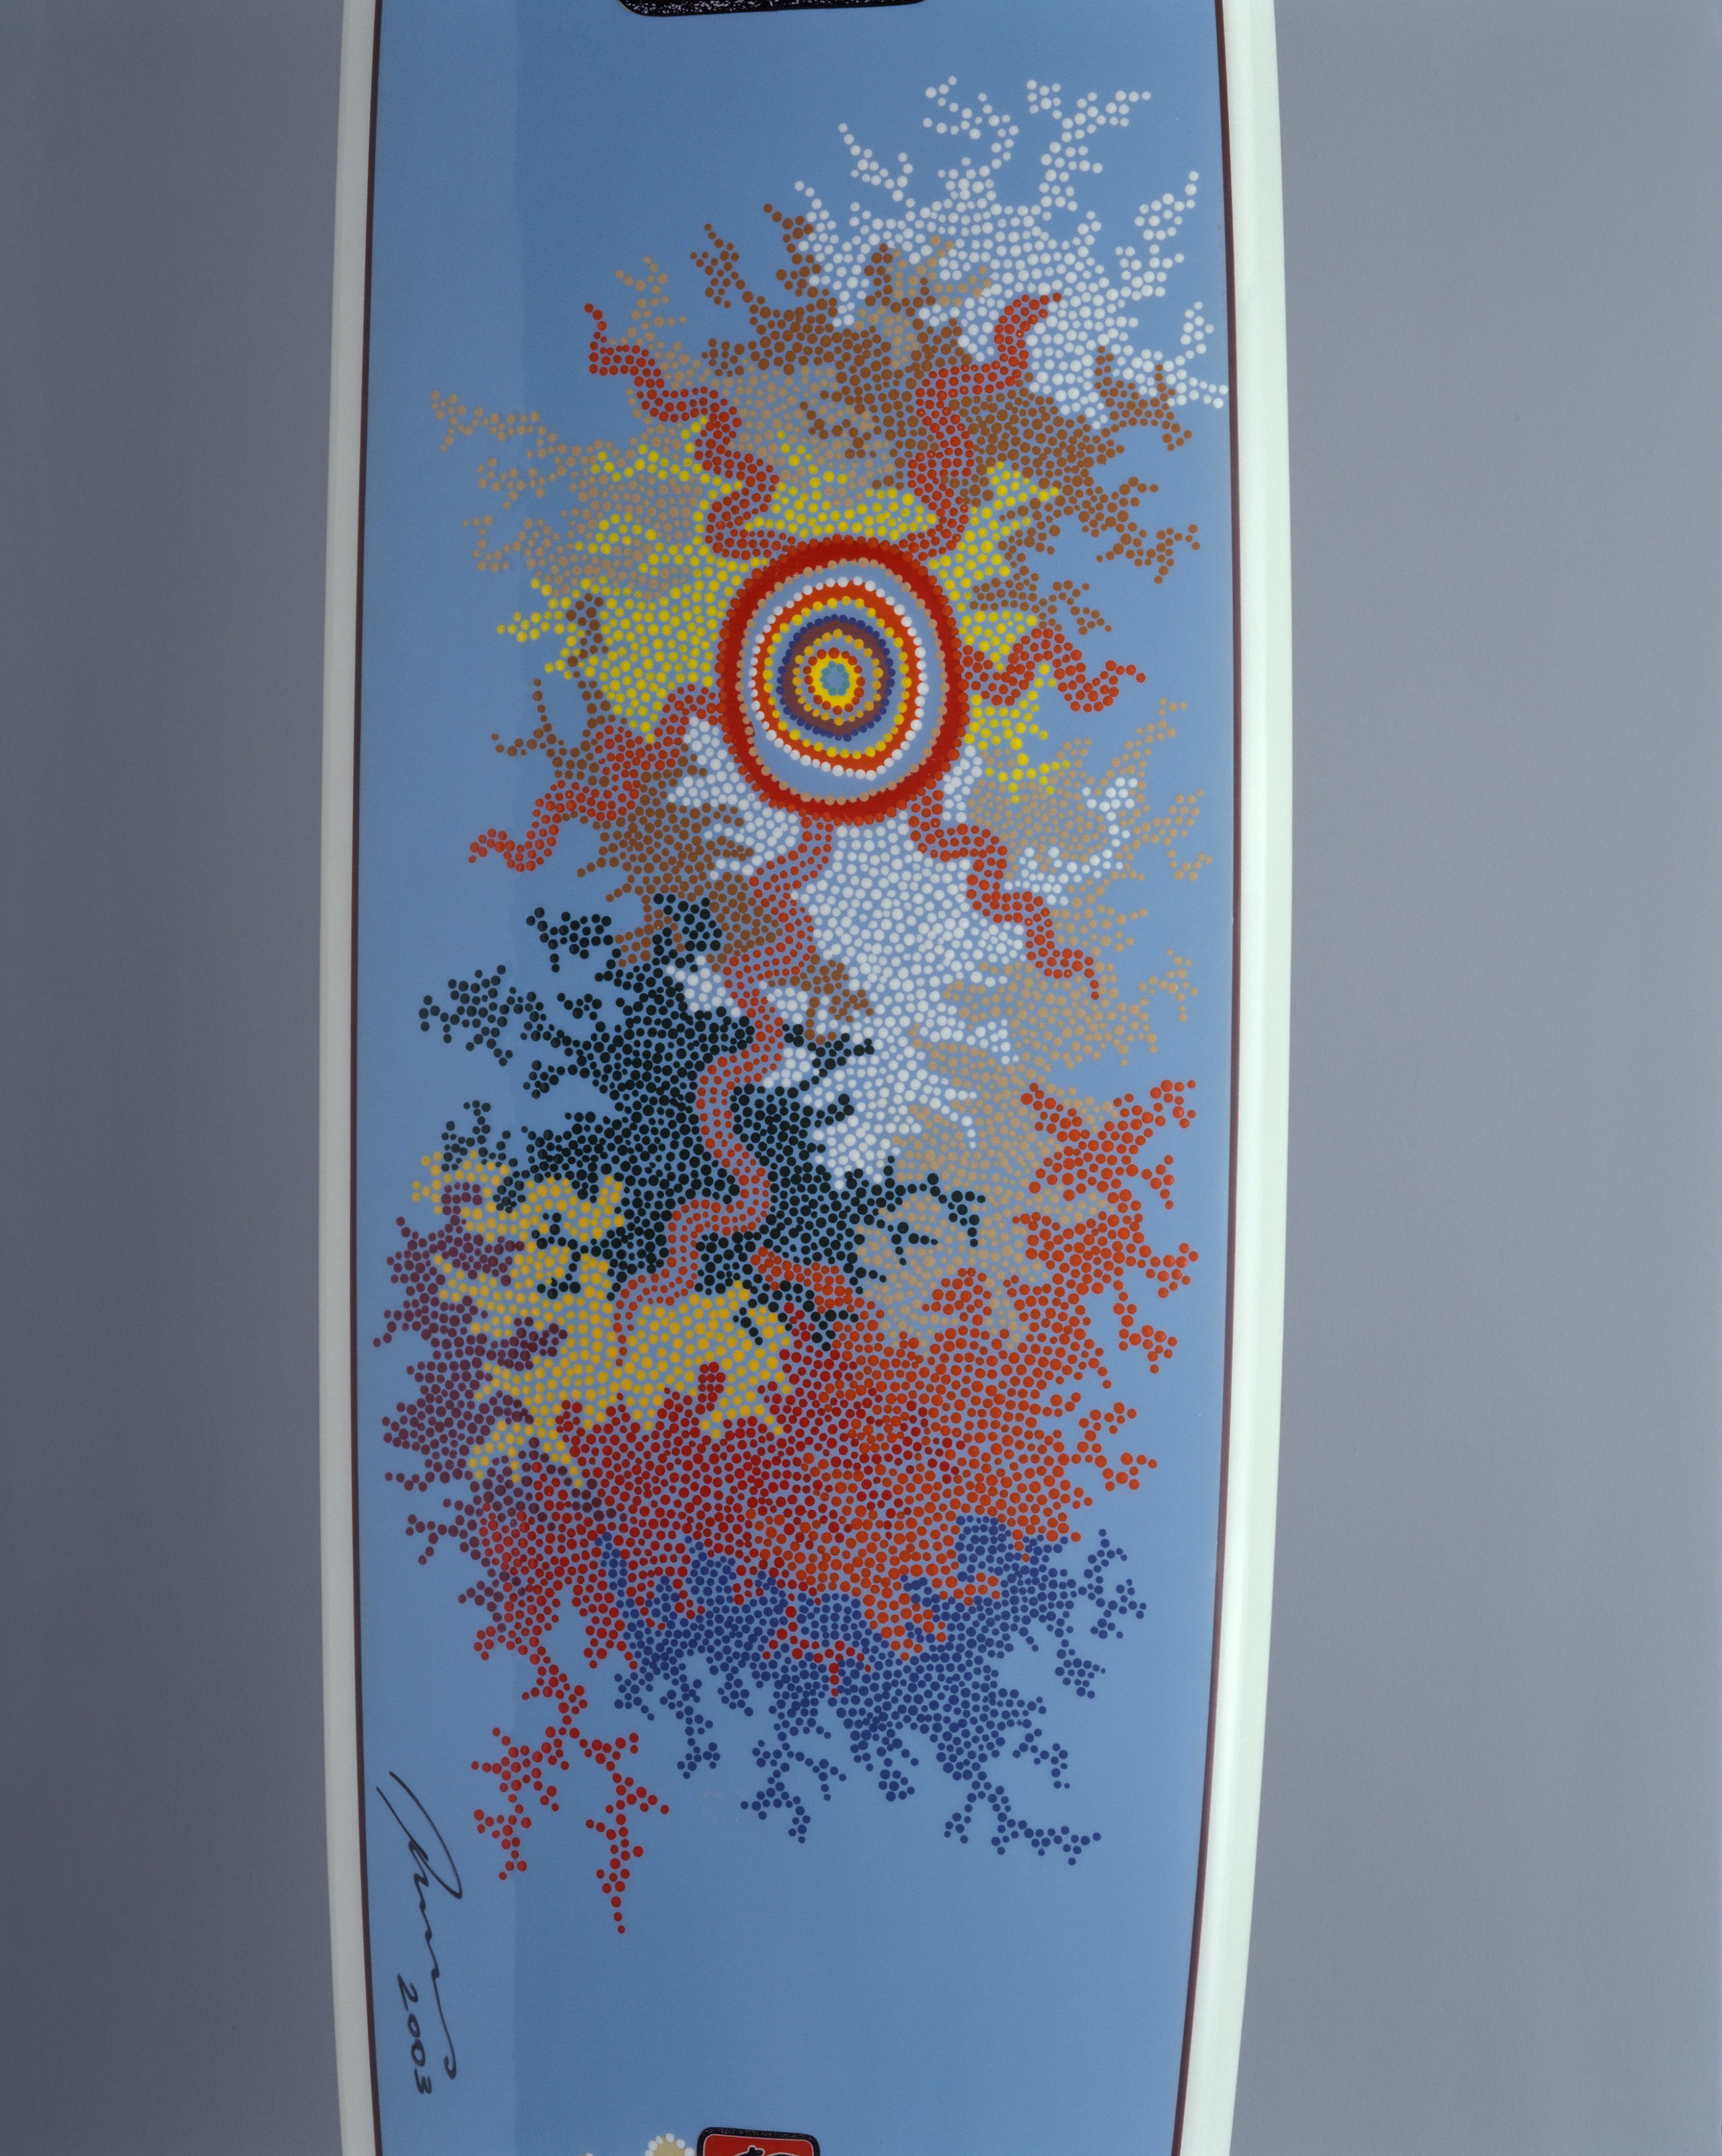 Surfboard by Kevin Williams